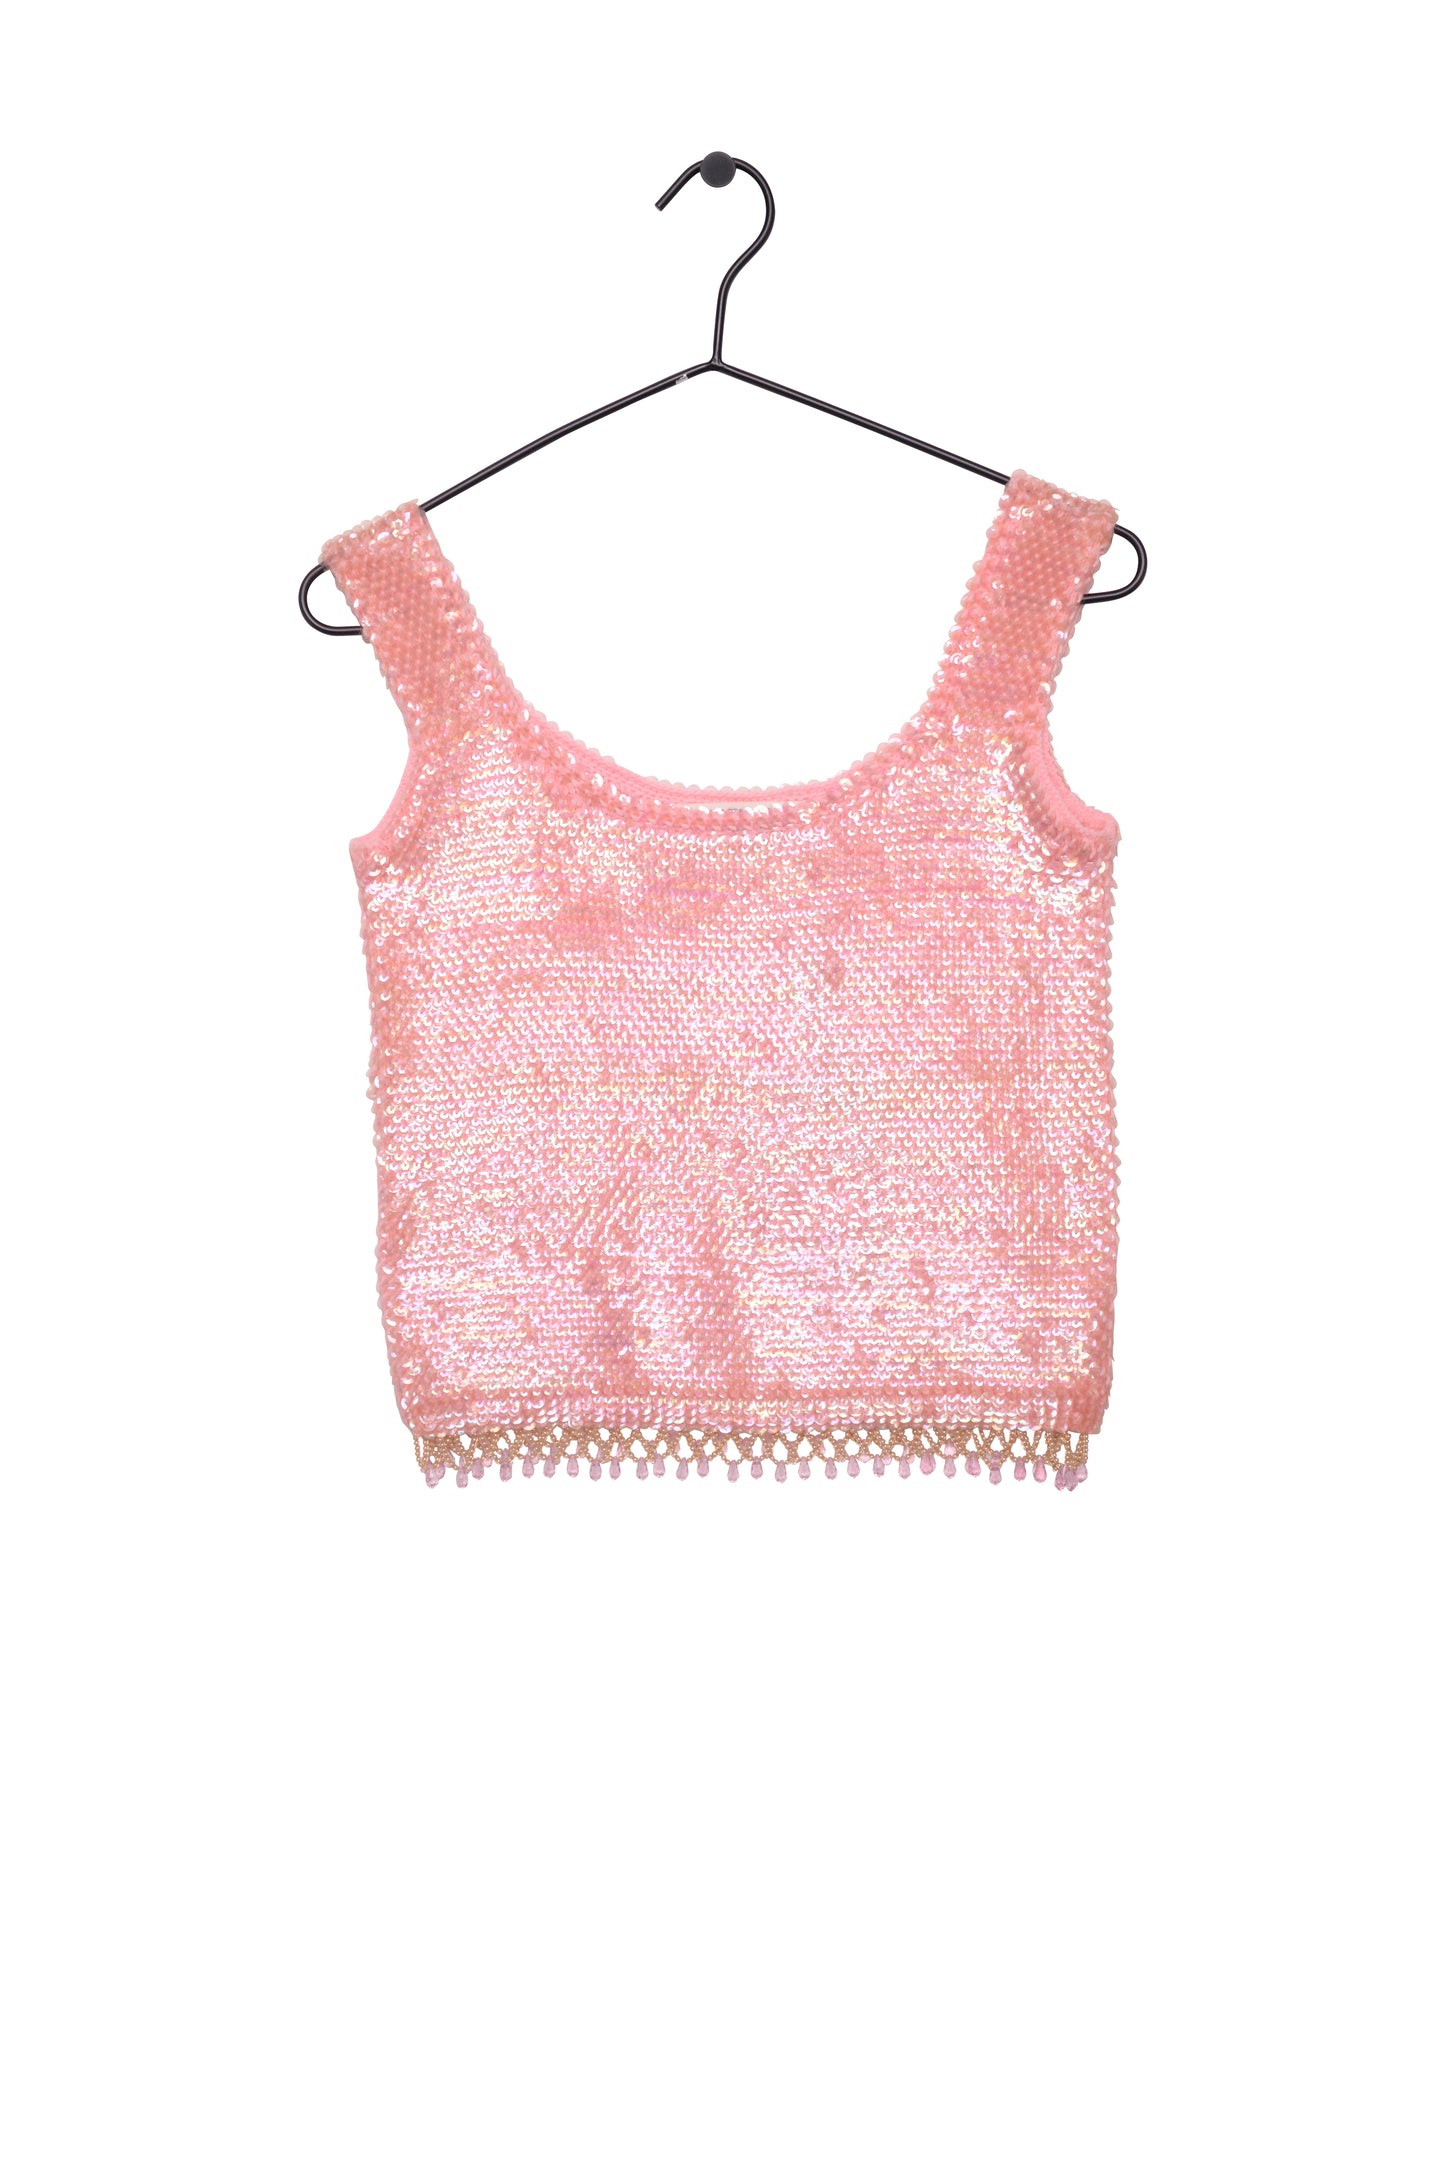 Sequin Cropped Top